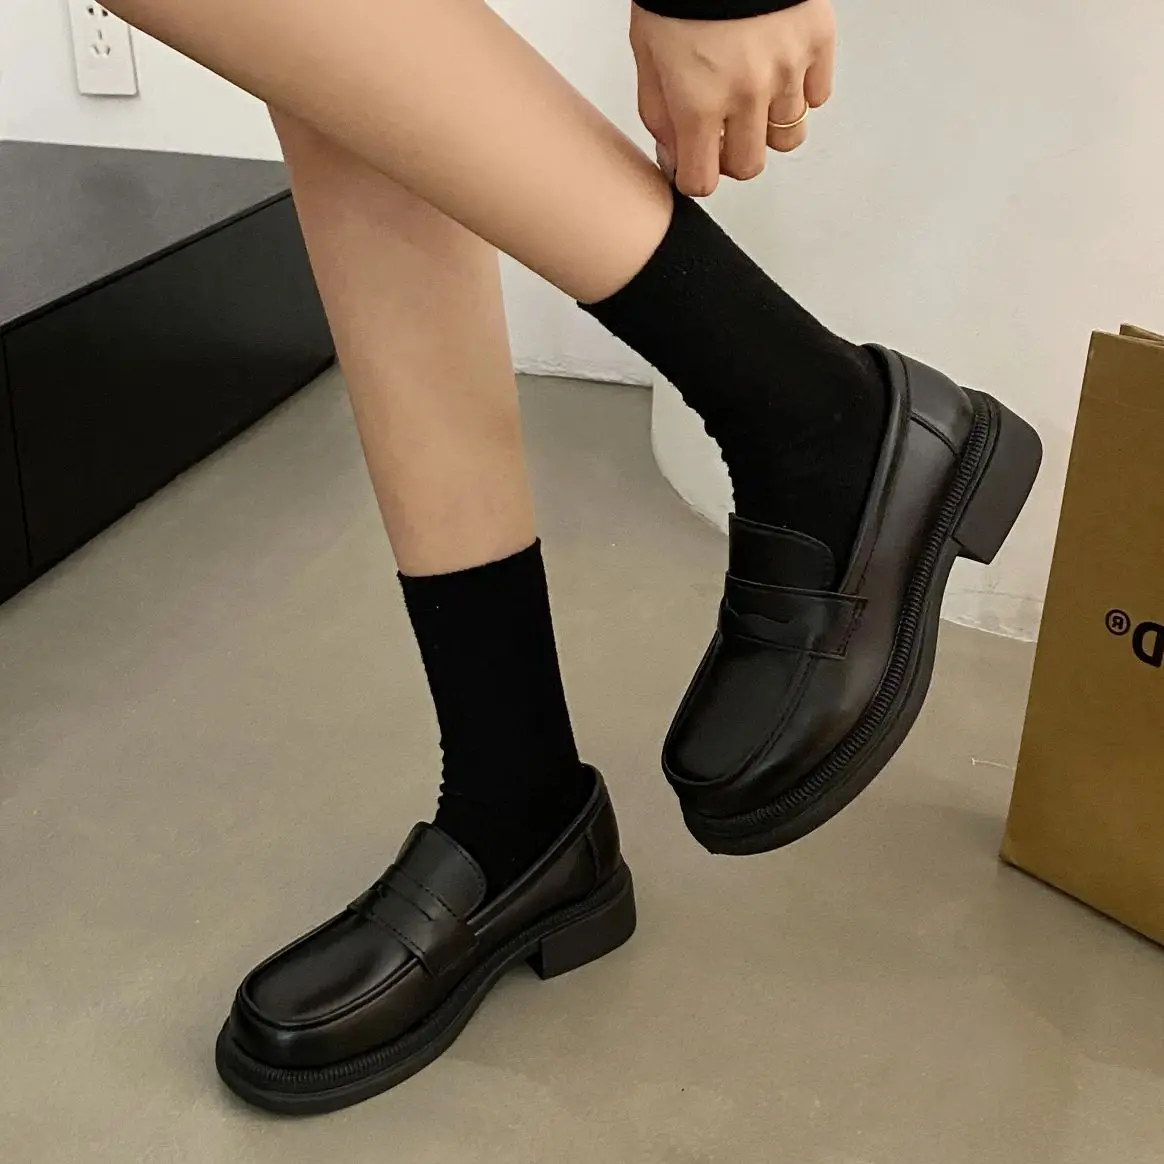 New Japanese Style College Student Shoes Cosplay Lolita Shoes for Women/Girl Fashion Black/Coffee Uniform Platform Shoes 2023